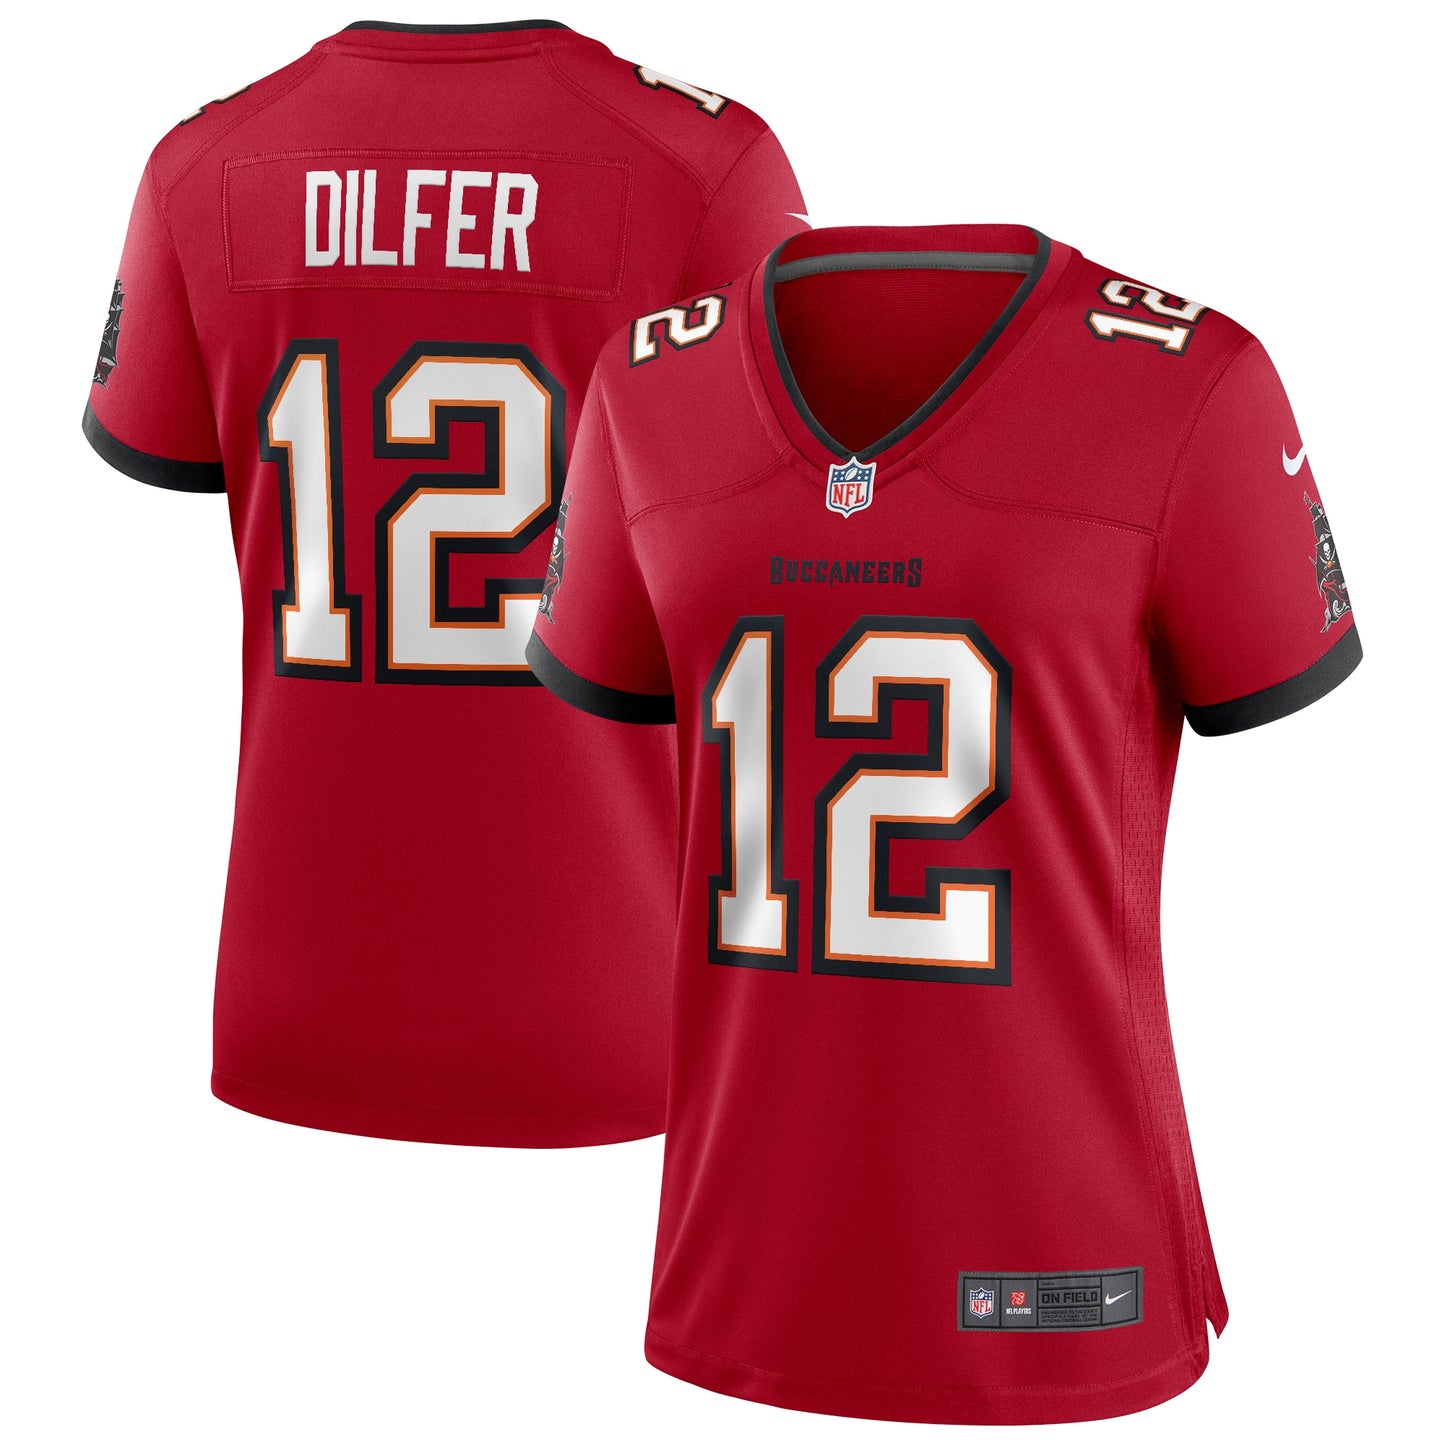 Trent Dilfer Tampa Bay Buccaneers Nike Women's Game Retired Player Jersey - Red